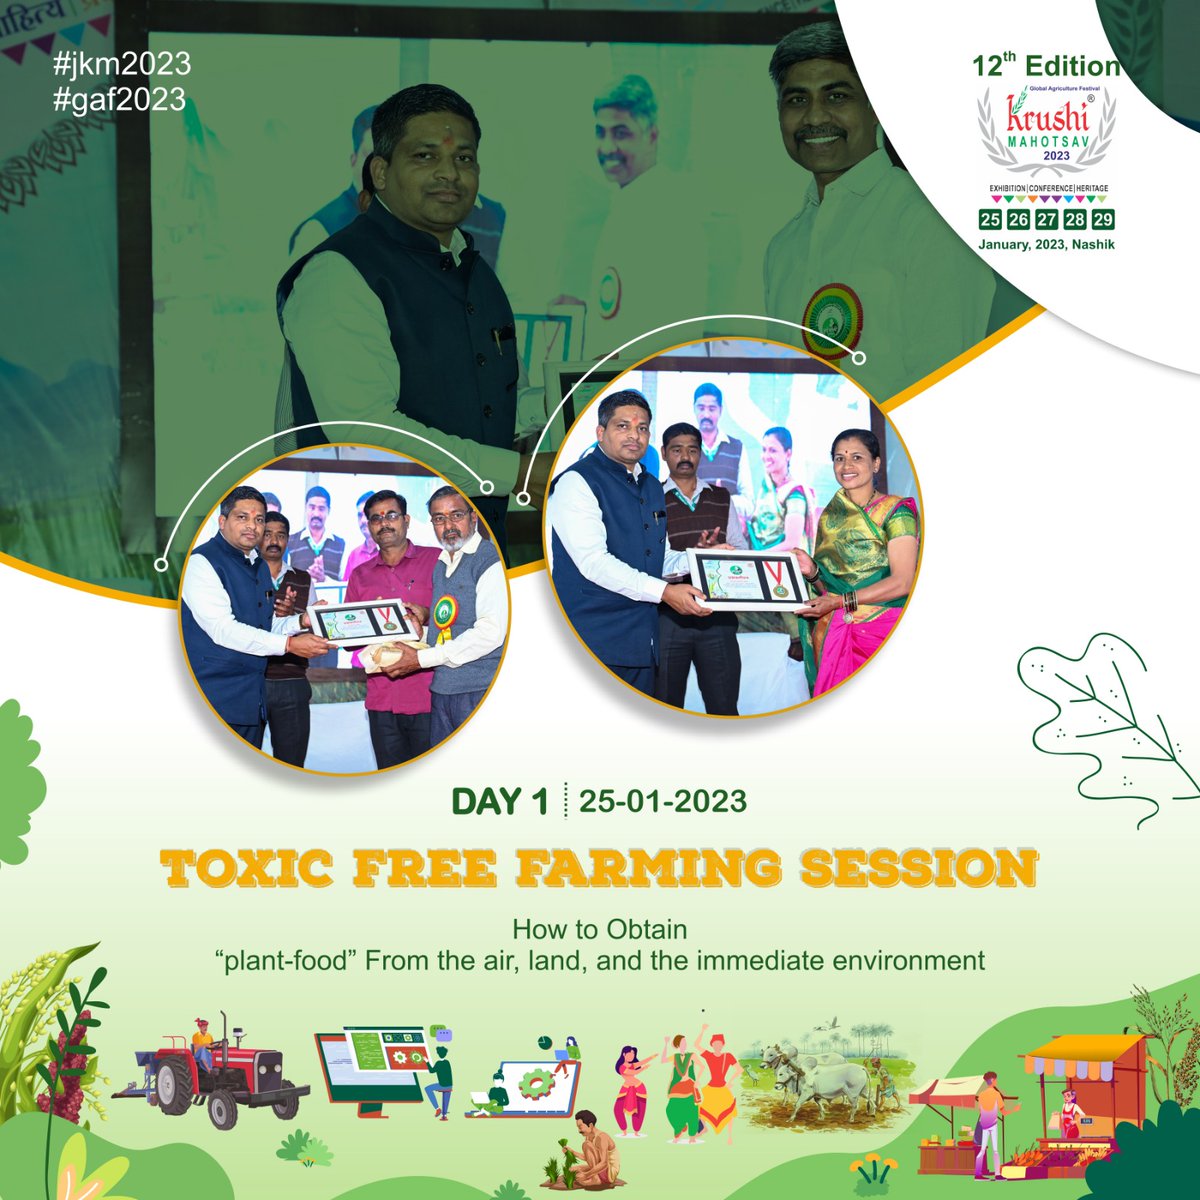 Toxic Free Farming Session 
Day 1 

#JKM2023 #GAF2023 #12thEditionKrushiMahotsav #JagtikKrushiMahotsav2023 #KrushiMahotsav2023 #AgricultureFestival #AgricultureExhibition #FoodProcessingExhibition #WellnessExhibition #SustainableAgriculture #AgricultureEco